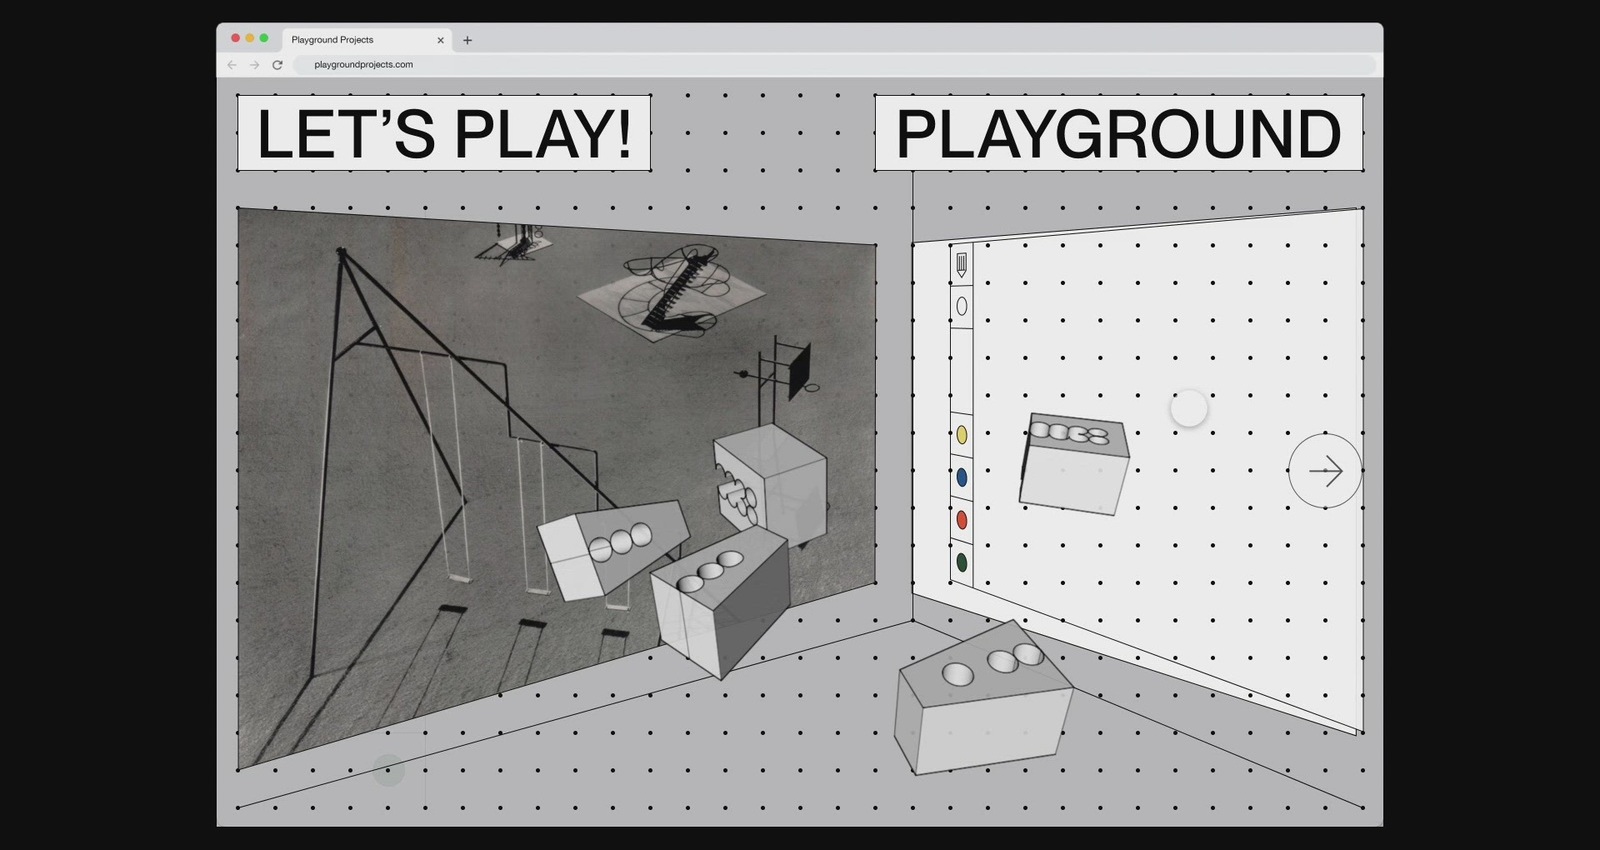 Playground Projects